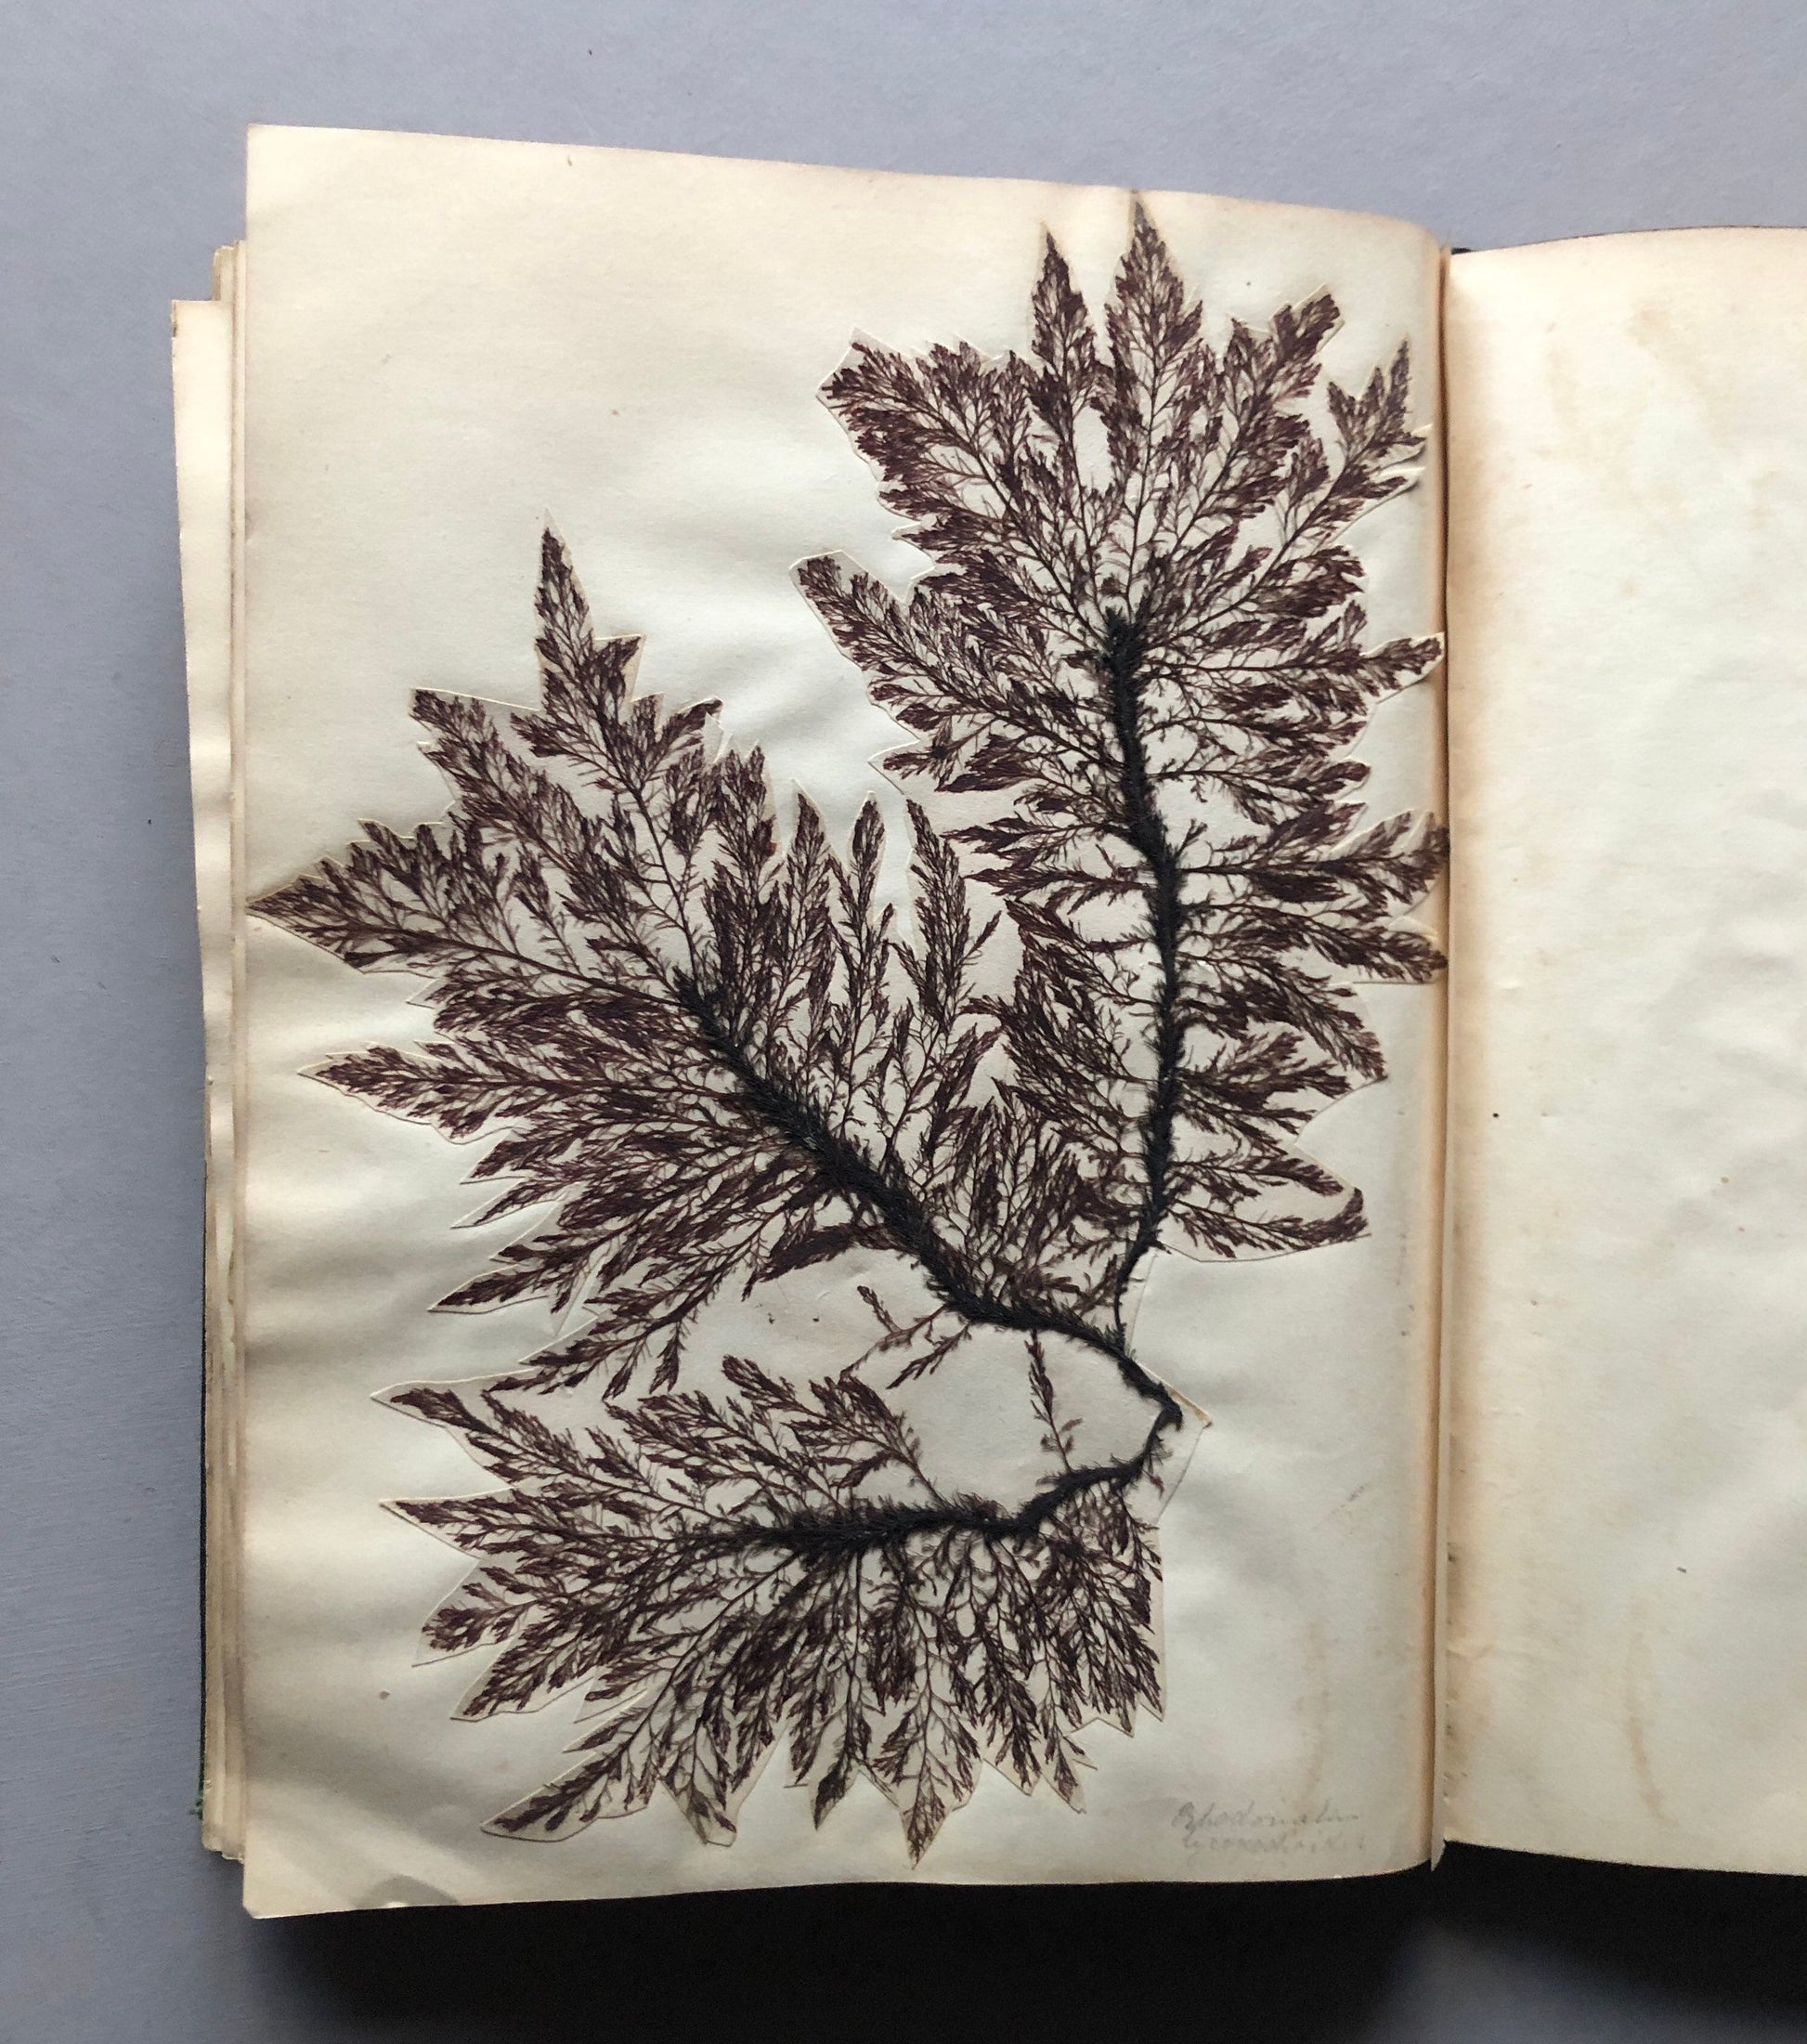 A Victorian Album Containing a Collection of 29 Seaweed. Samples size: